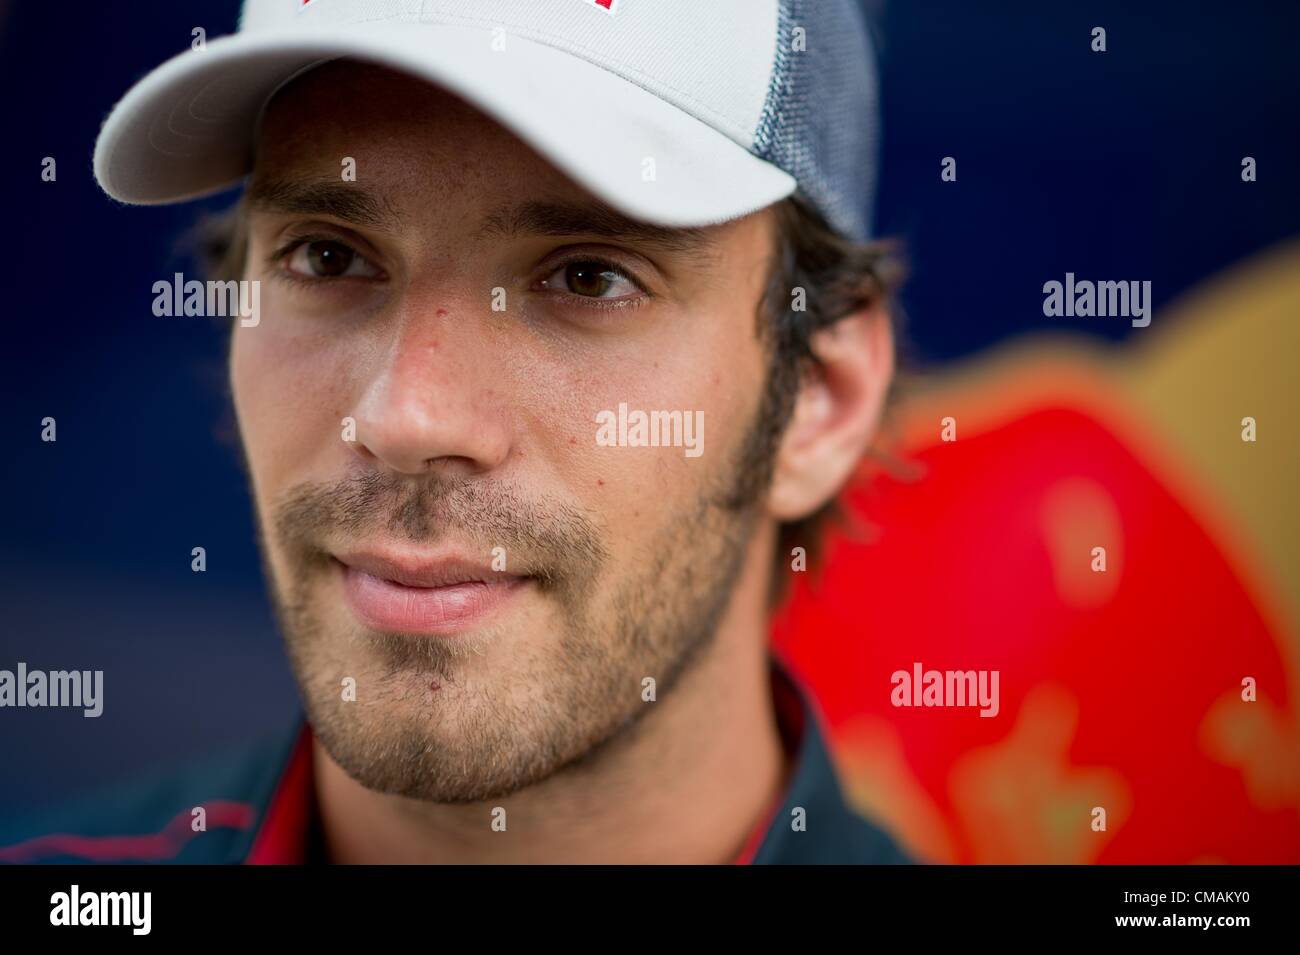 05.07.2012. Silverstone Circuit, Northampton, England. French Formula One driver Jean-Eric Vergne of Toro Rosso talks to journaliste in the paddock at the Silverstone race track in Northamptonshire, Great Britain, 05 July 2012. The Formula One Grand Prix of Great Britain will take place on 08 July 2011. Stock Photo